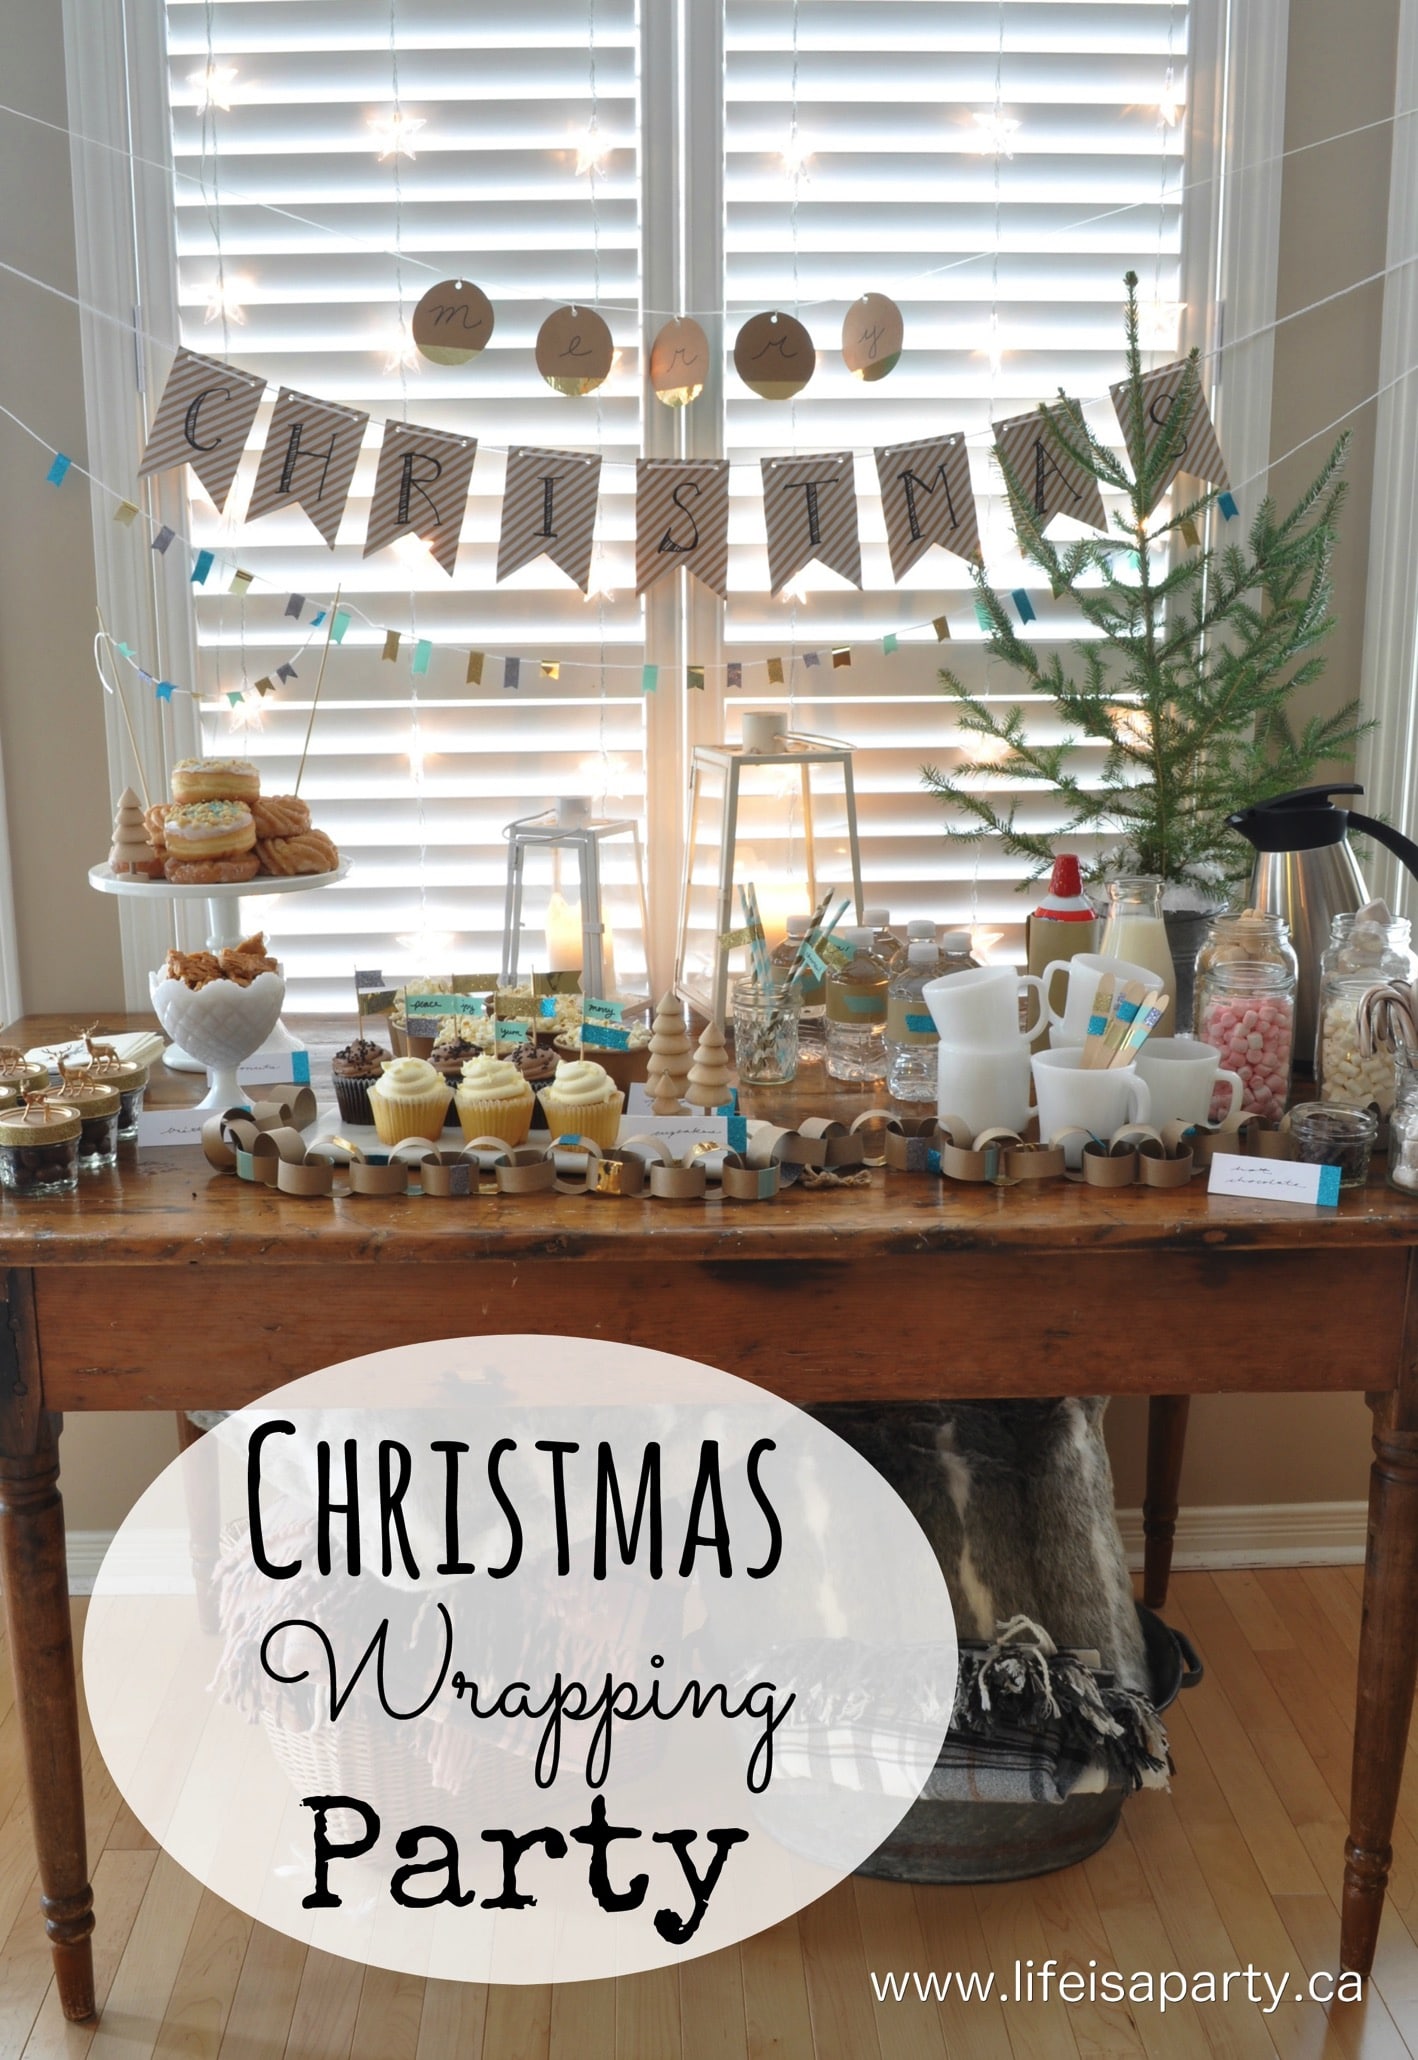 Christmas Gift Wrapping Party: DIY personalized party decorations, dessert table, party drinks and DIY gift tags and gift wrapping ideas.